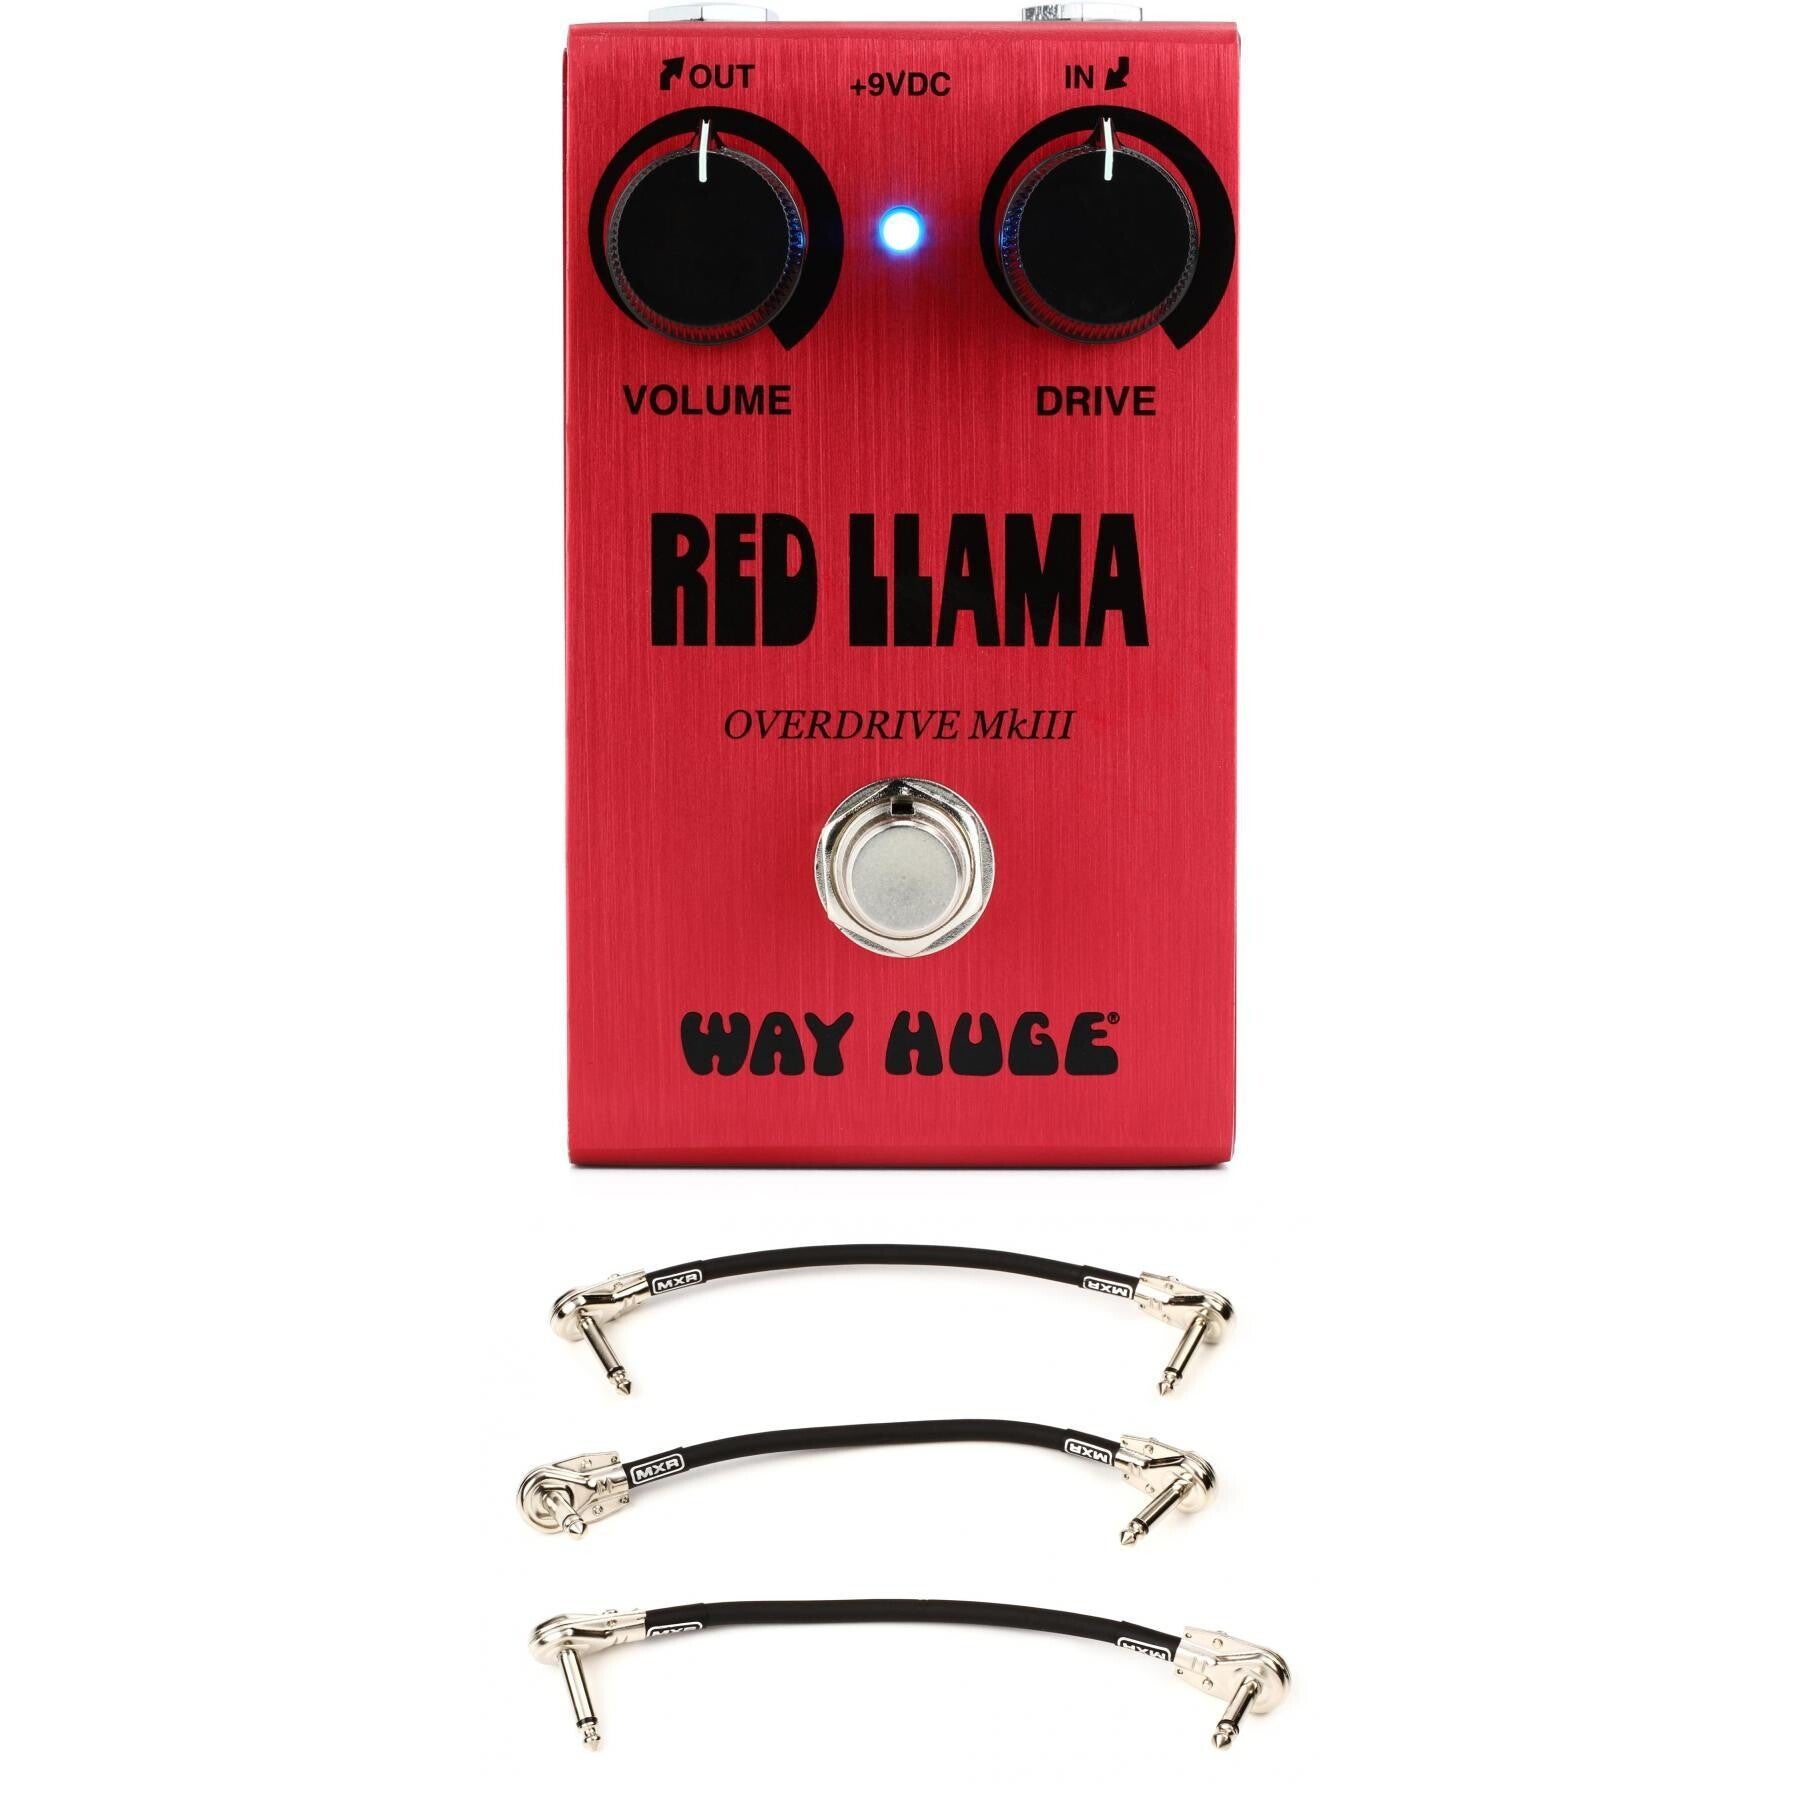 Way Huge Red Llama Overdrive MkIII Smalls Pedal with 3 Patch Cables